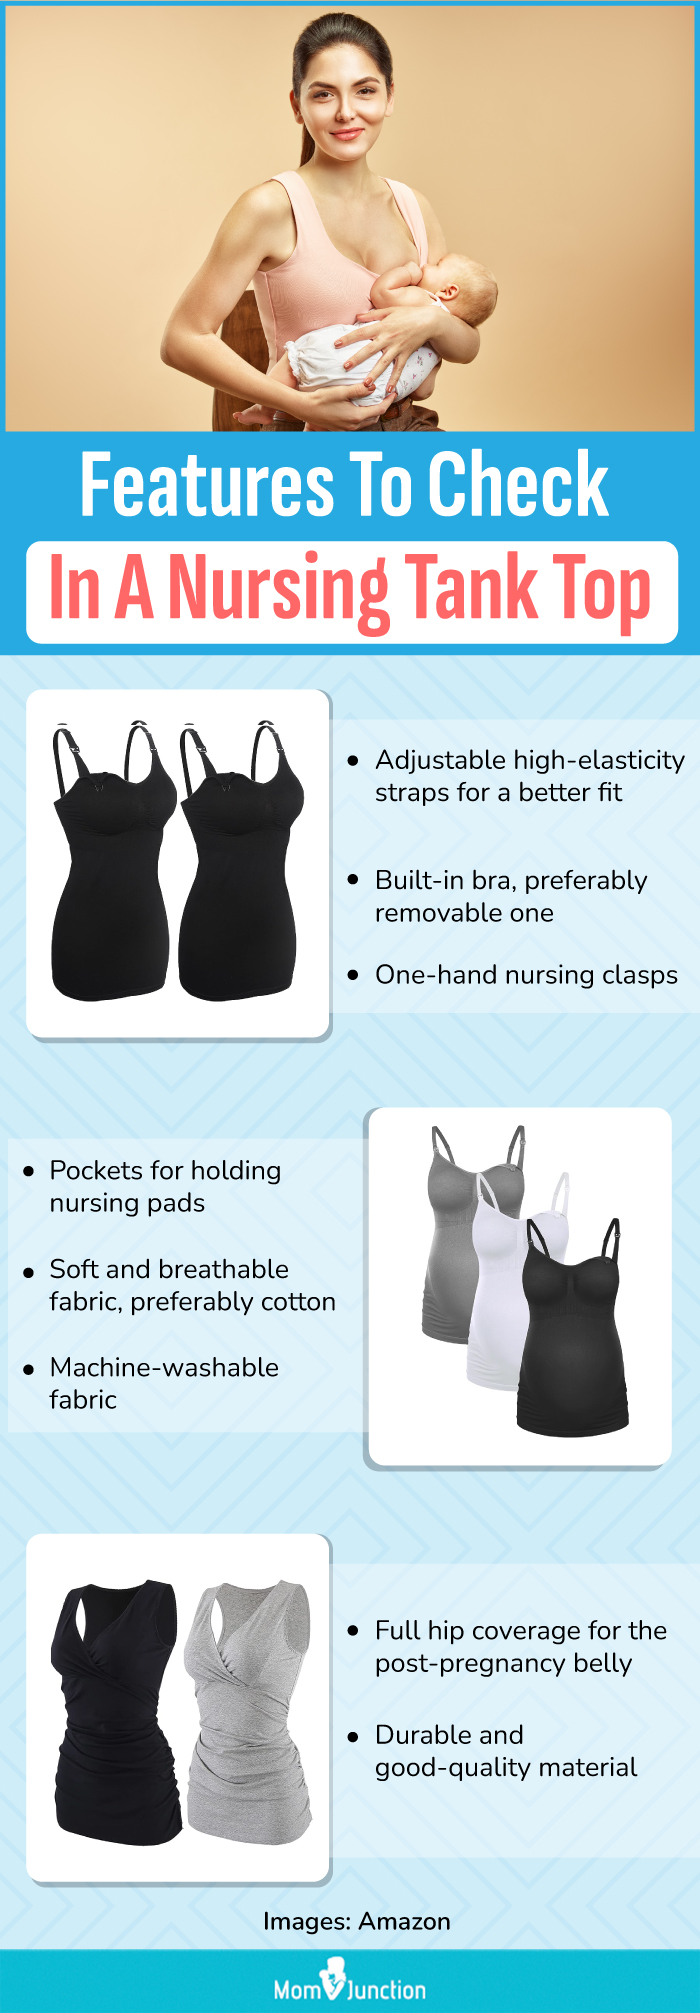 Features To Check In A Nursing Tank Top (infographic)